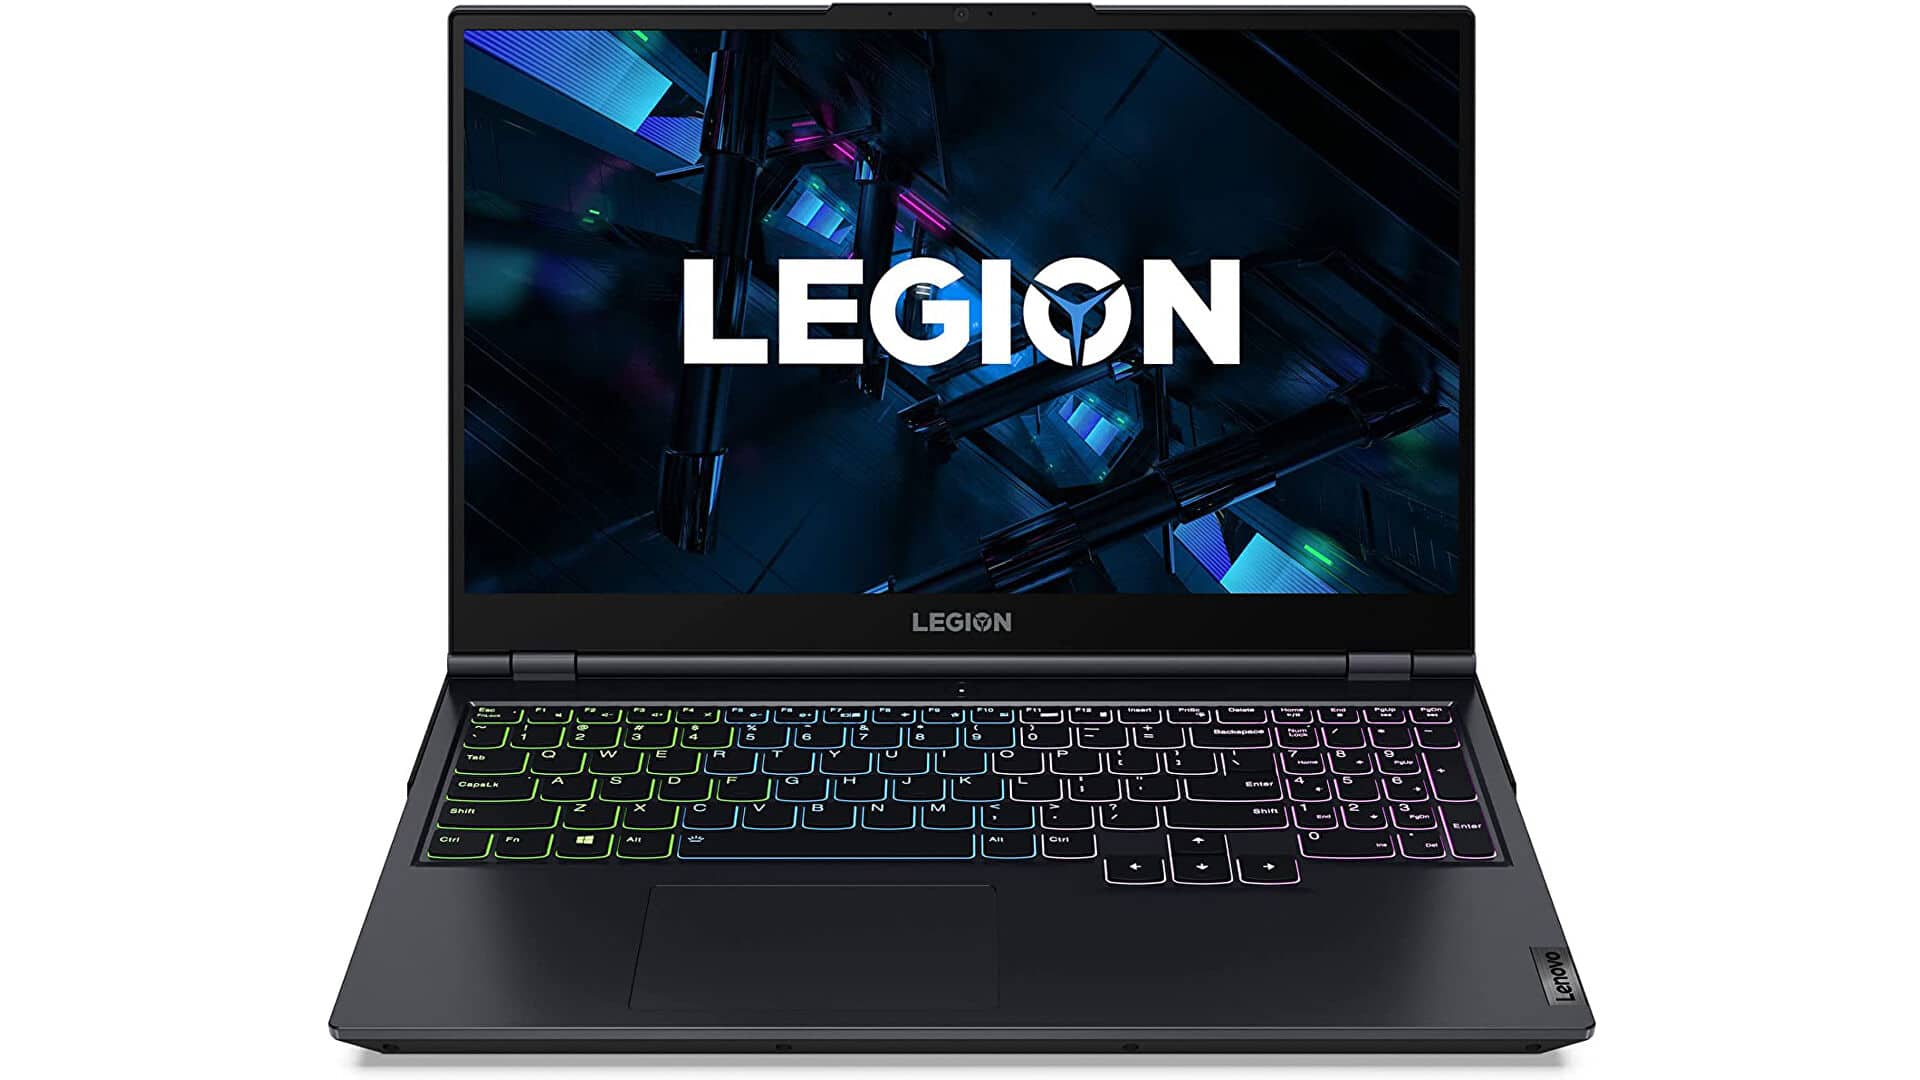 Get a Lenovo Legion RTX 3060 gaming laptop for £800 after a 20% reduction